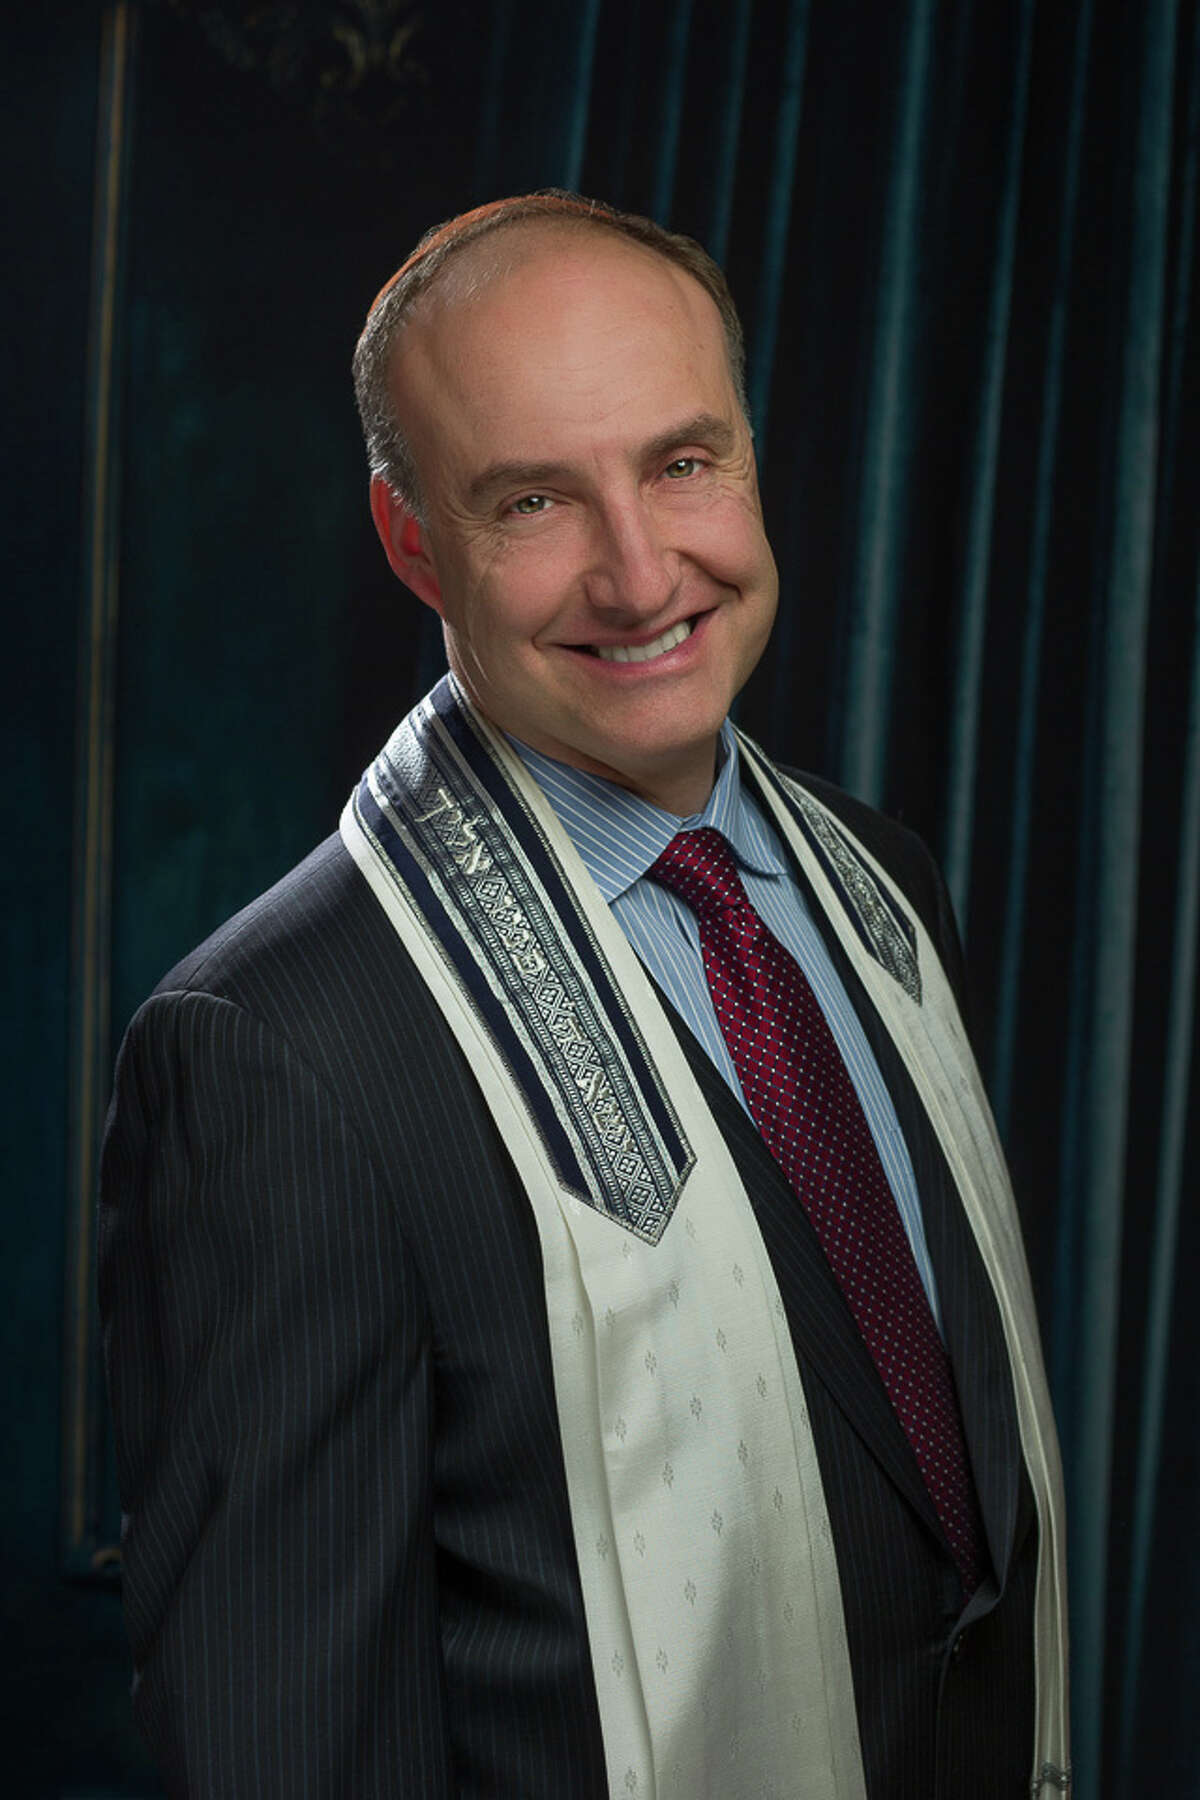 Mark Perman is the newest cantor at Emanu El synagogue.